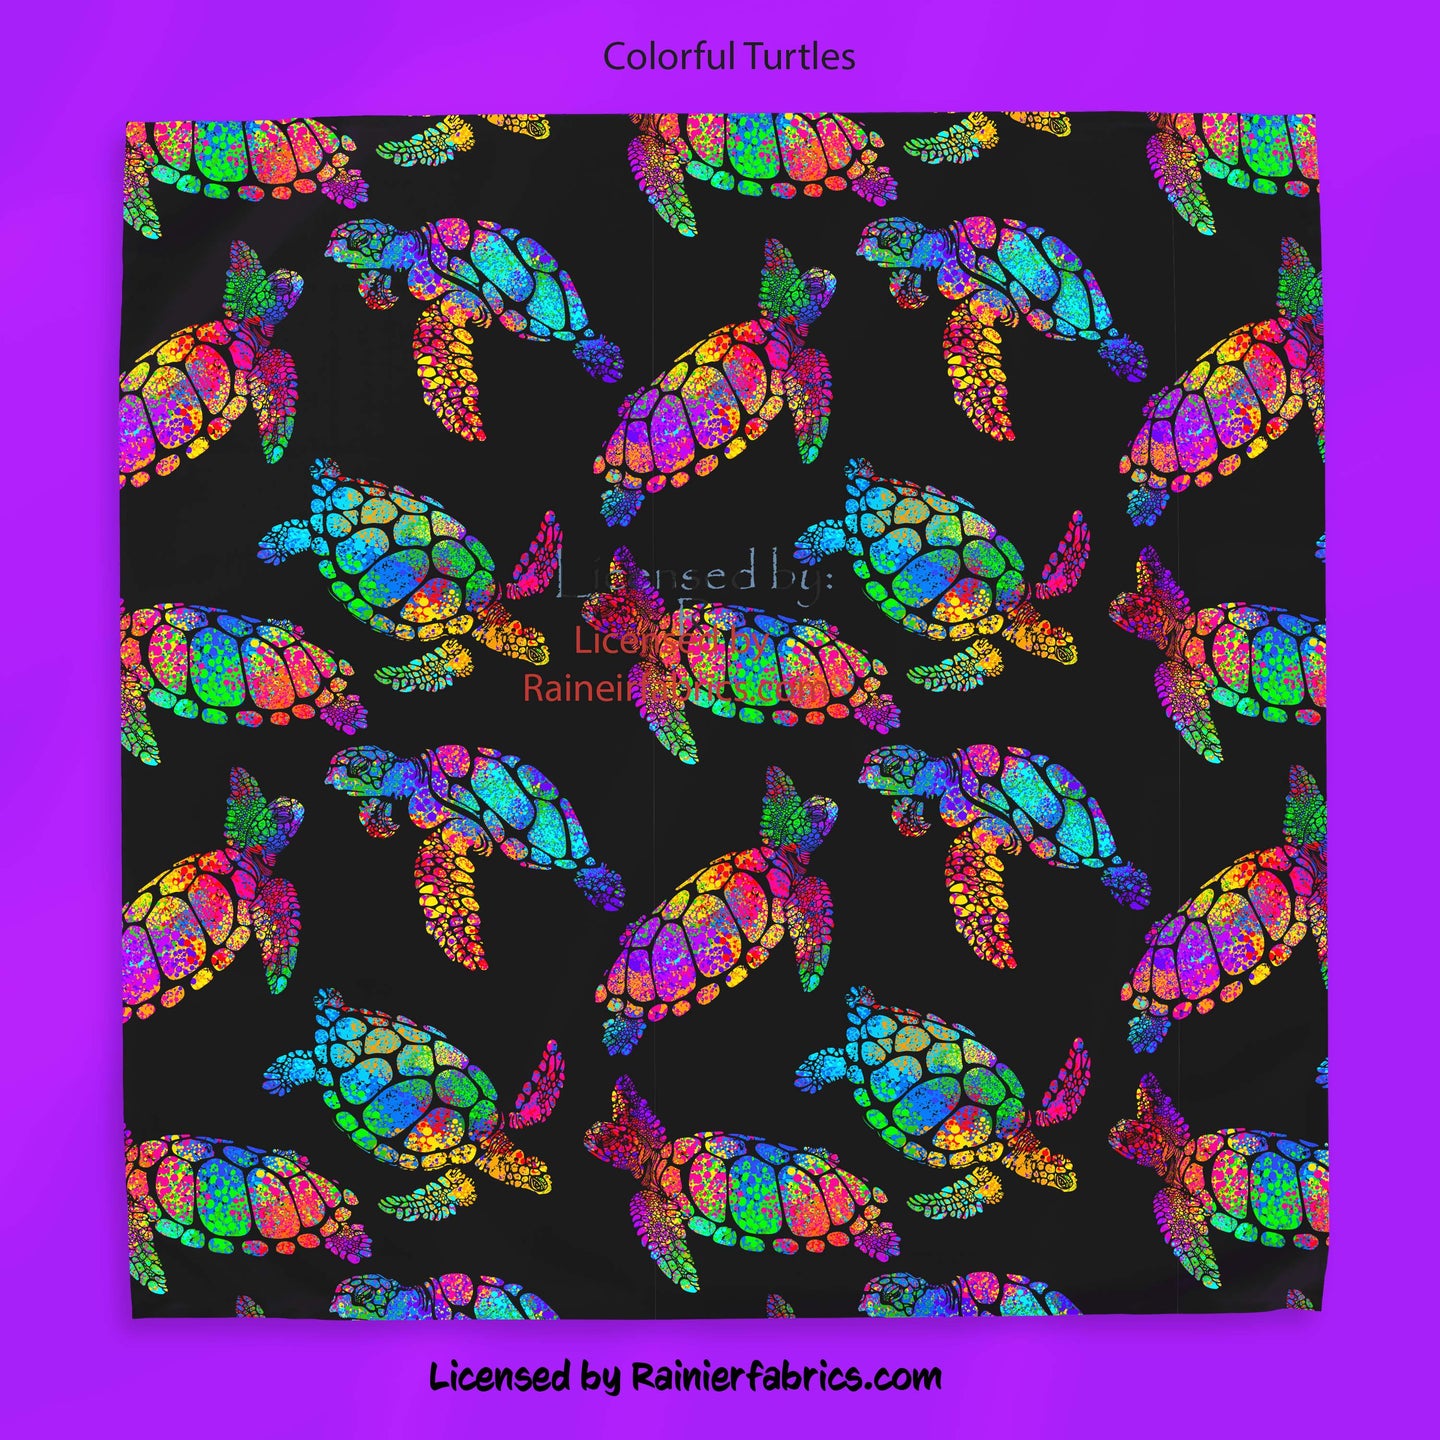 Colorful Turtles - 2-5 business days to ship - Order by 1/2 yard